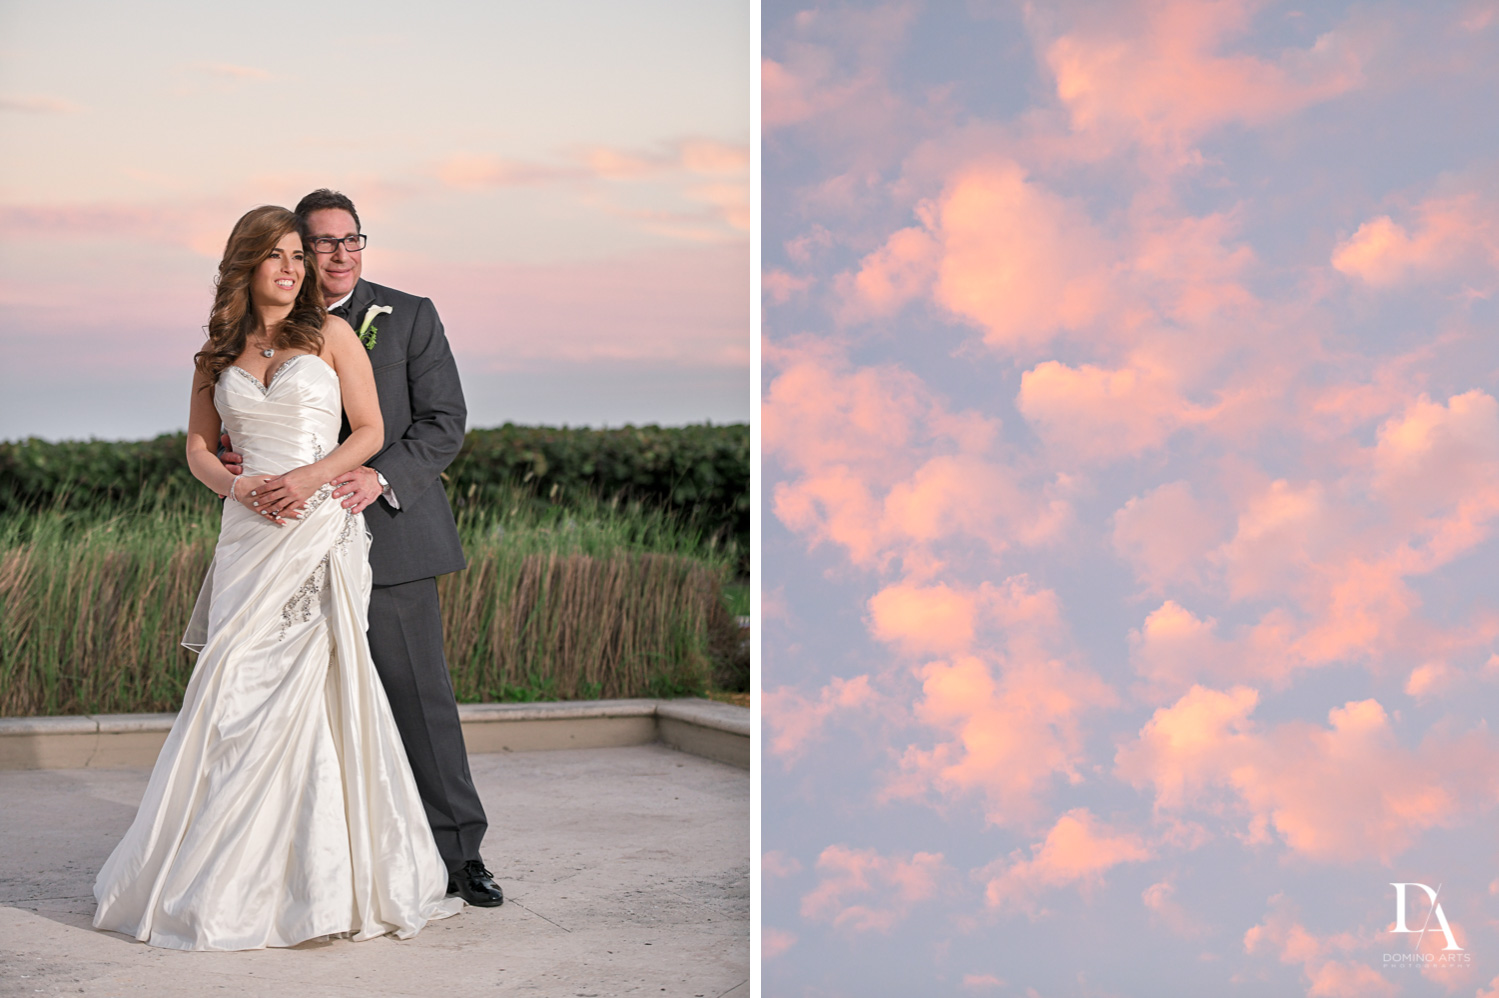 Classic Wedding Photography in South Florida at Fort Lauderdale Marriott Harbor Beach Resort & Spa by Domino Arts Photography